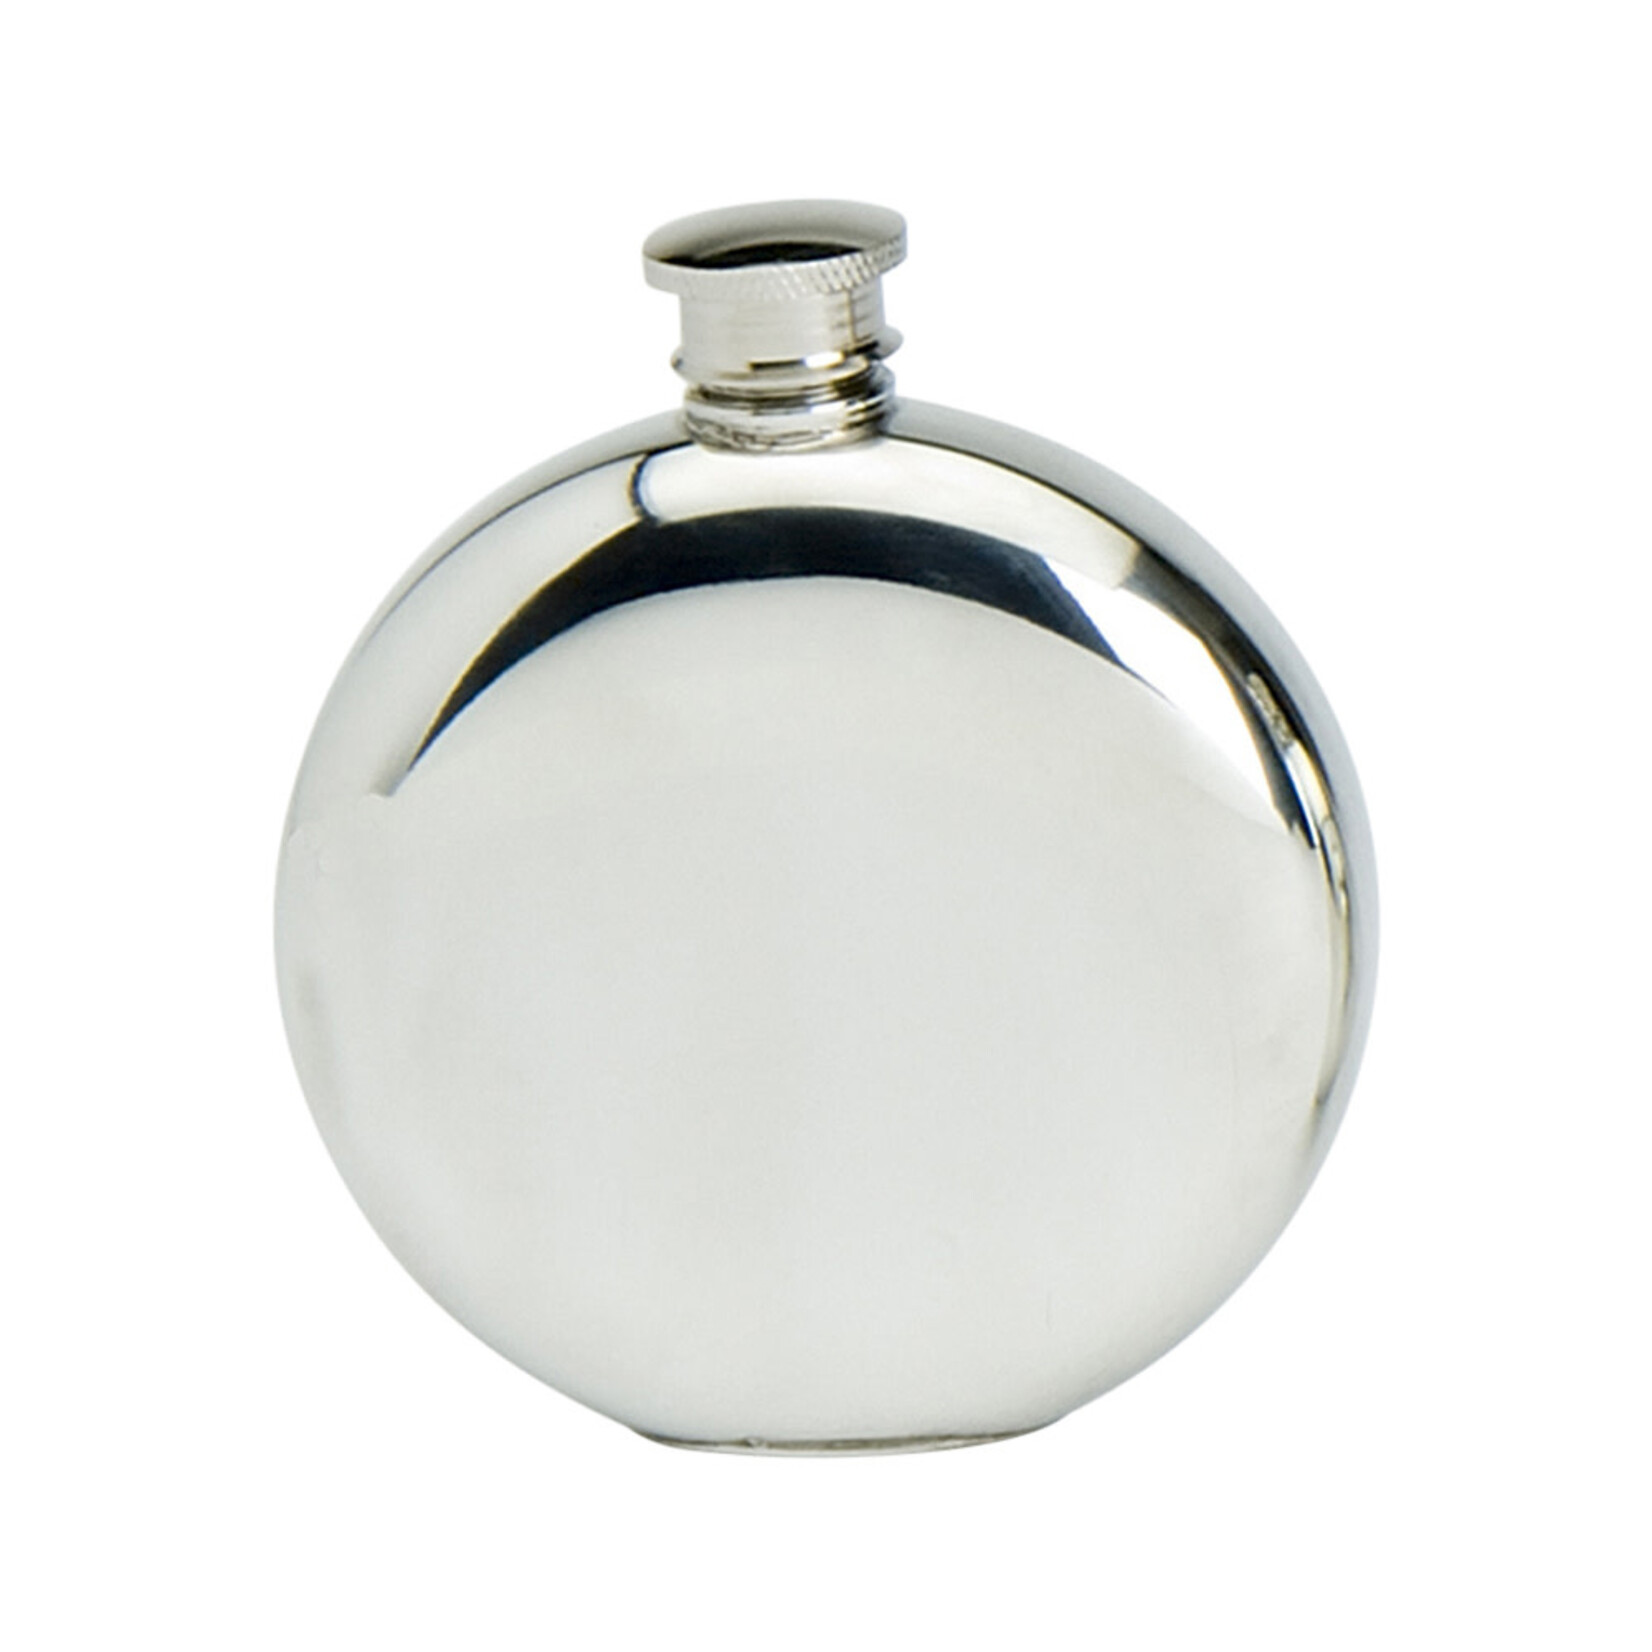 Corbell Silver Round Polished English Pewter Bottle Pocket Hip Flask 6oz Featuring Port Hole Insert